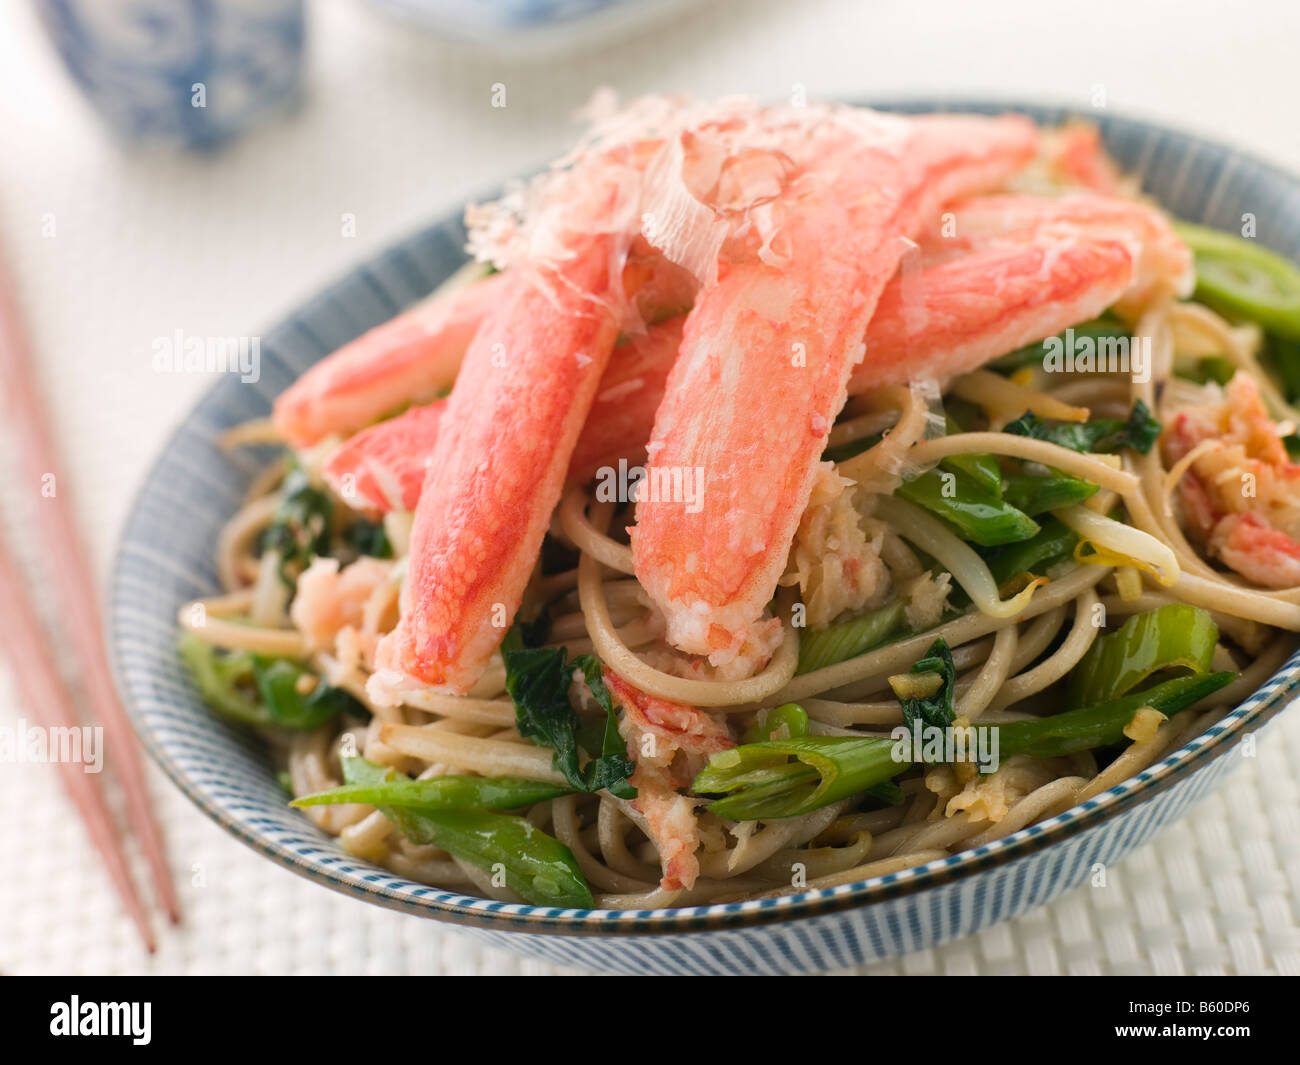 Snow Crab and Soba Noodle Salad Stock Photo